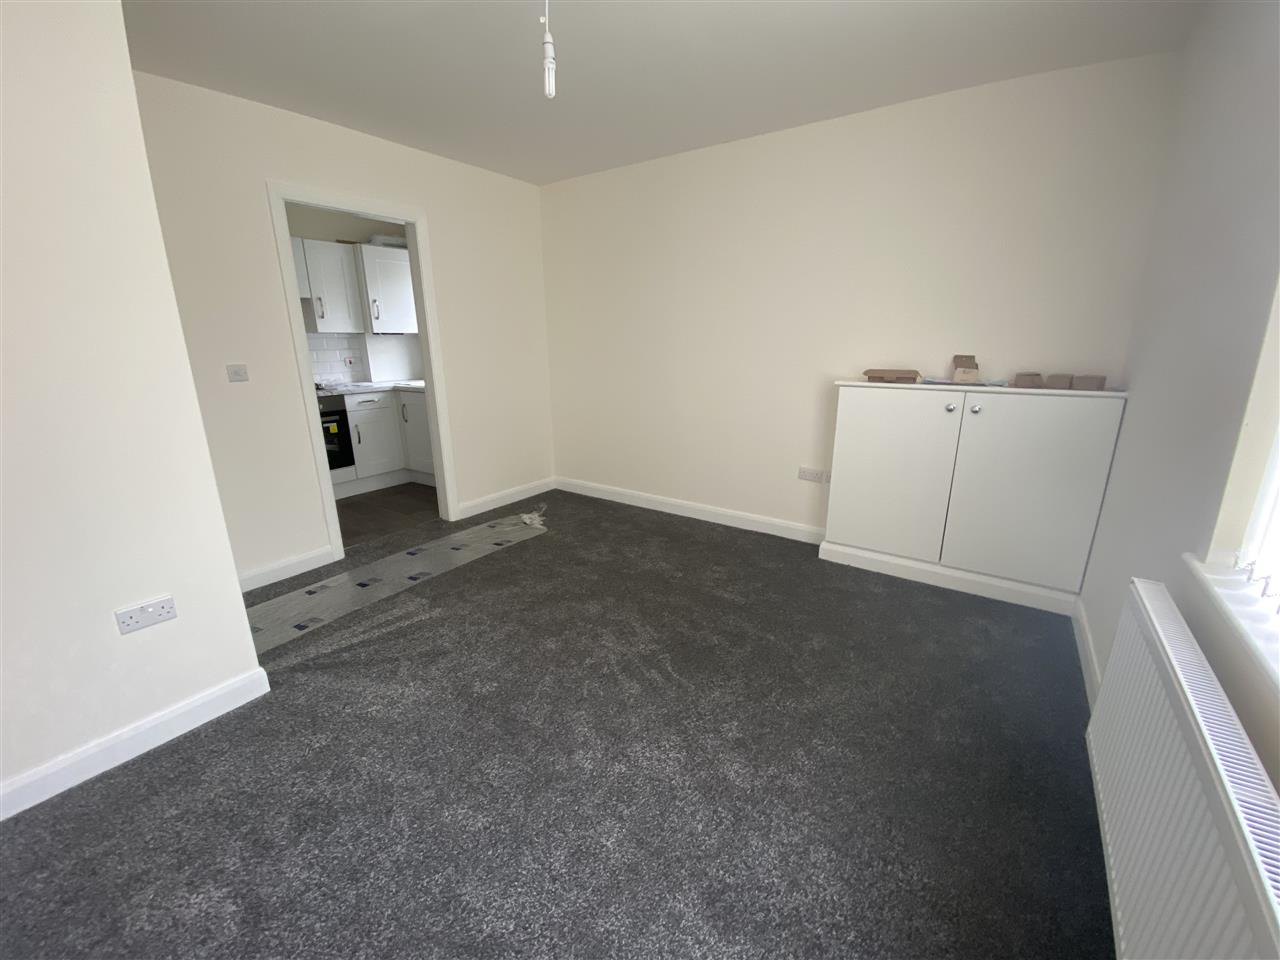 2 bed  to rent in Spendmore, Coppull, Chorley 3